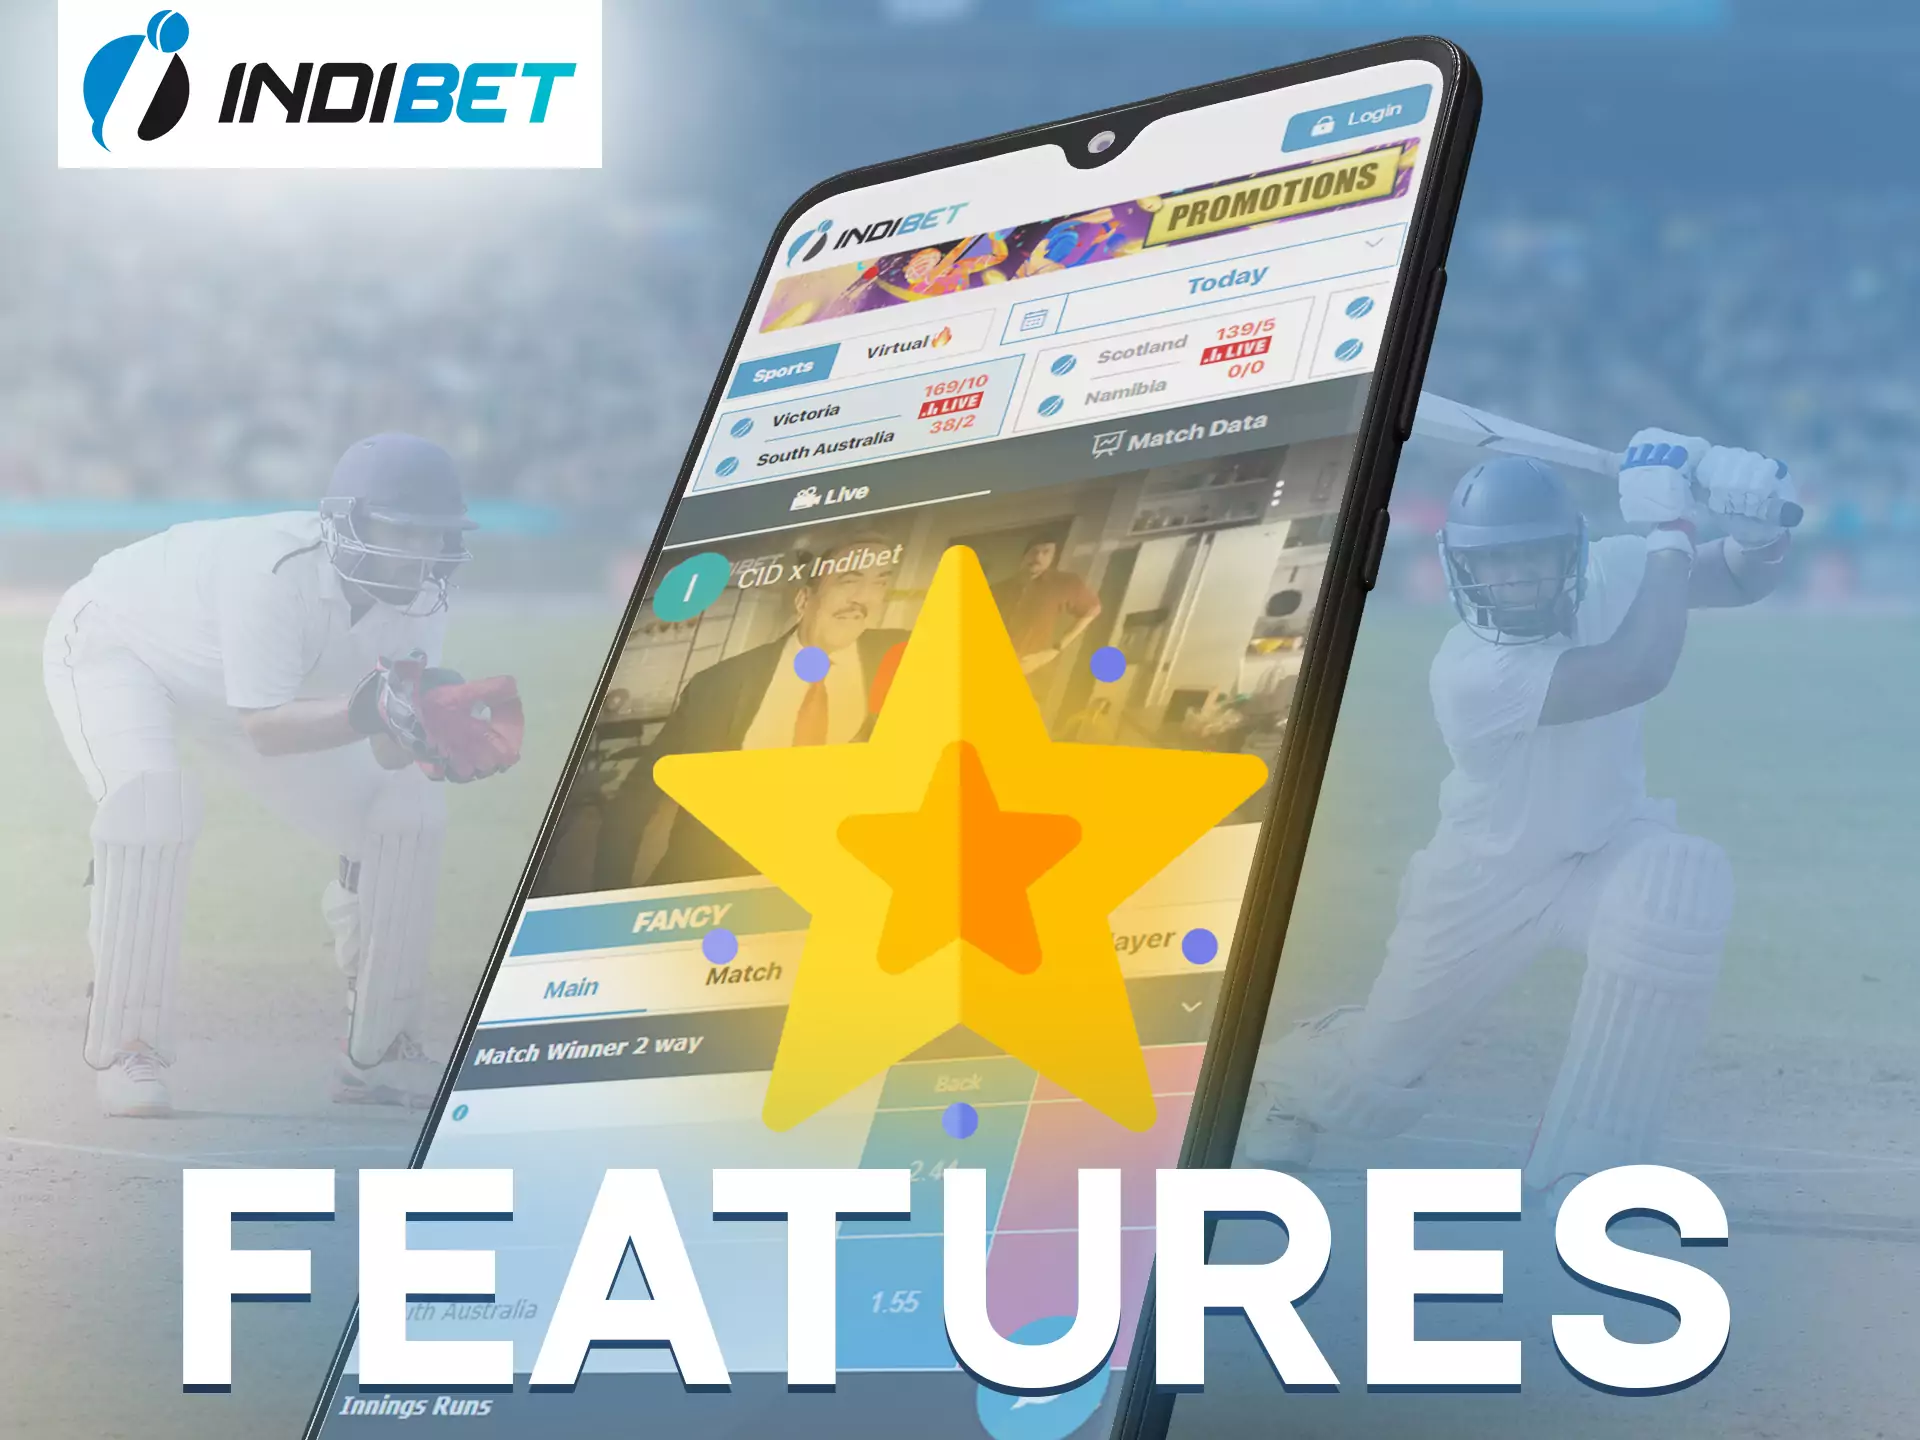 Use all of the features of Indibet app.